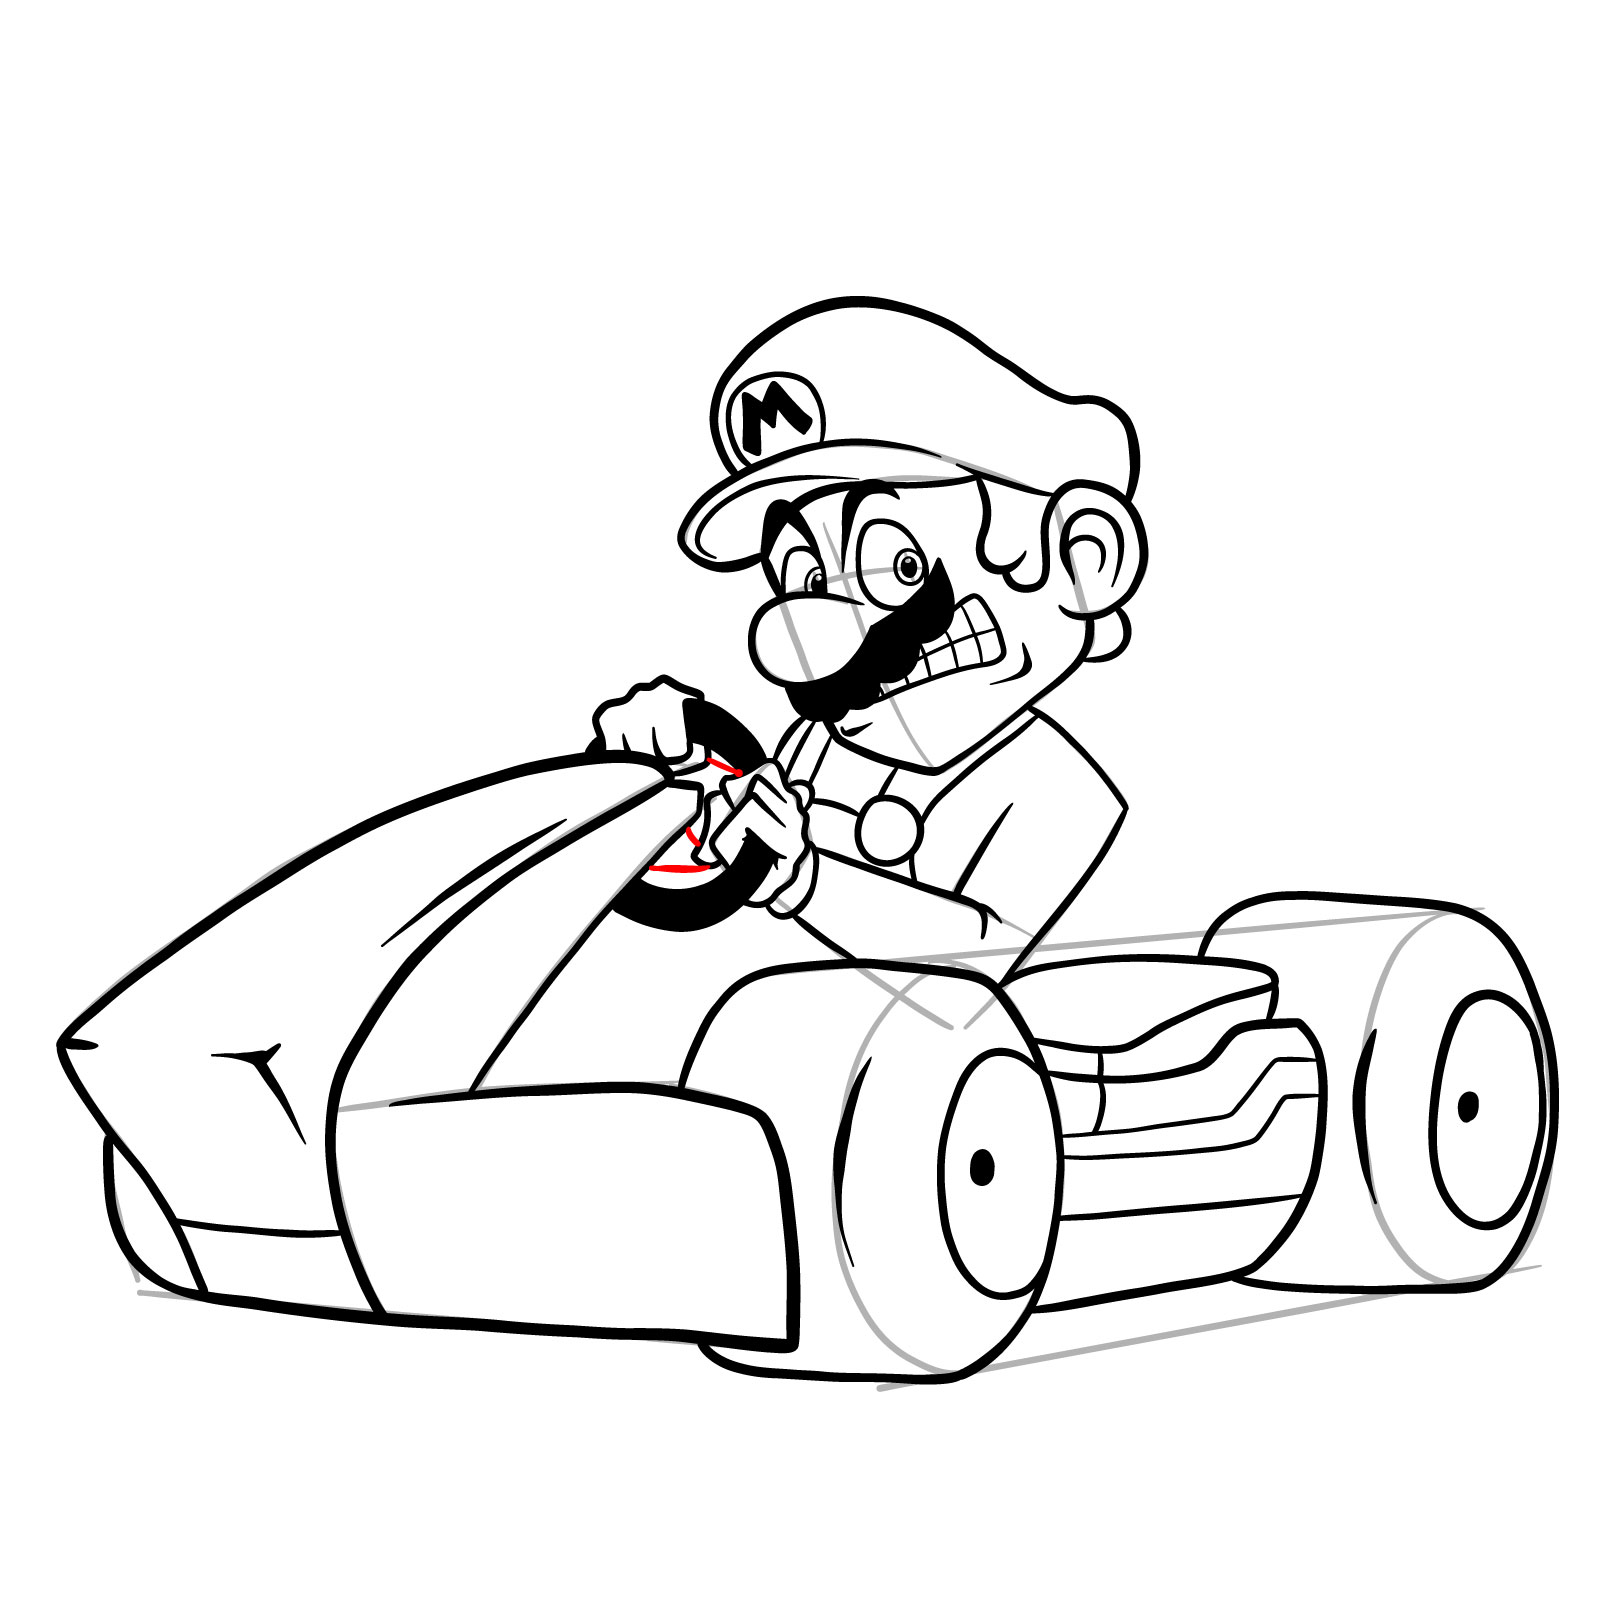 How to draw Race Traitors Mario - step 36